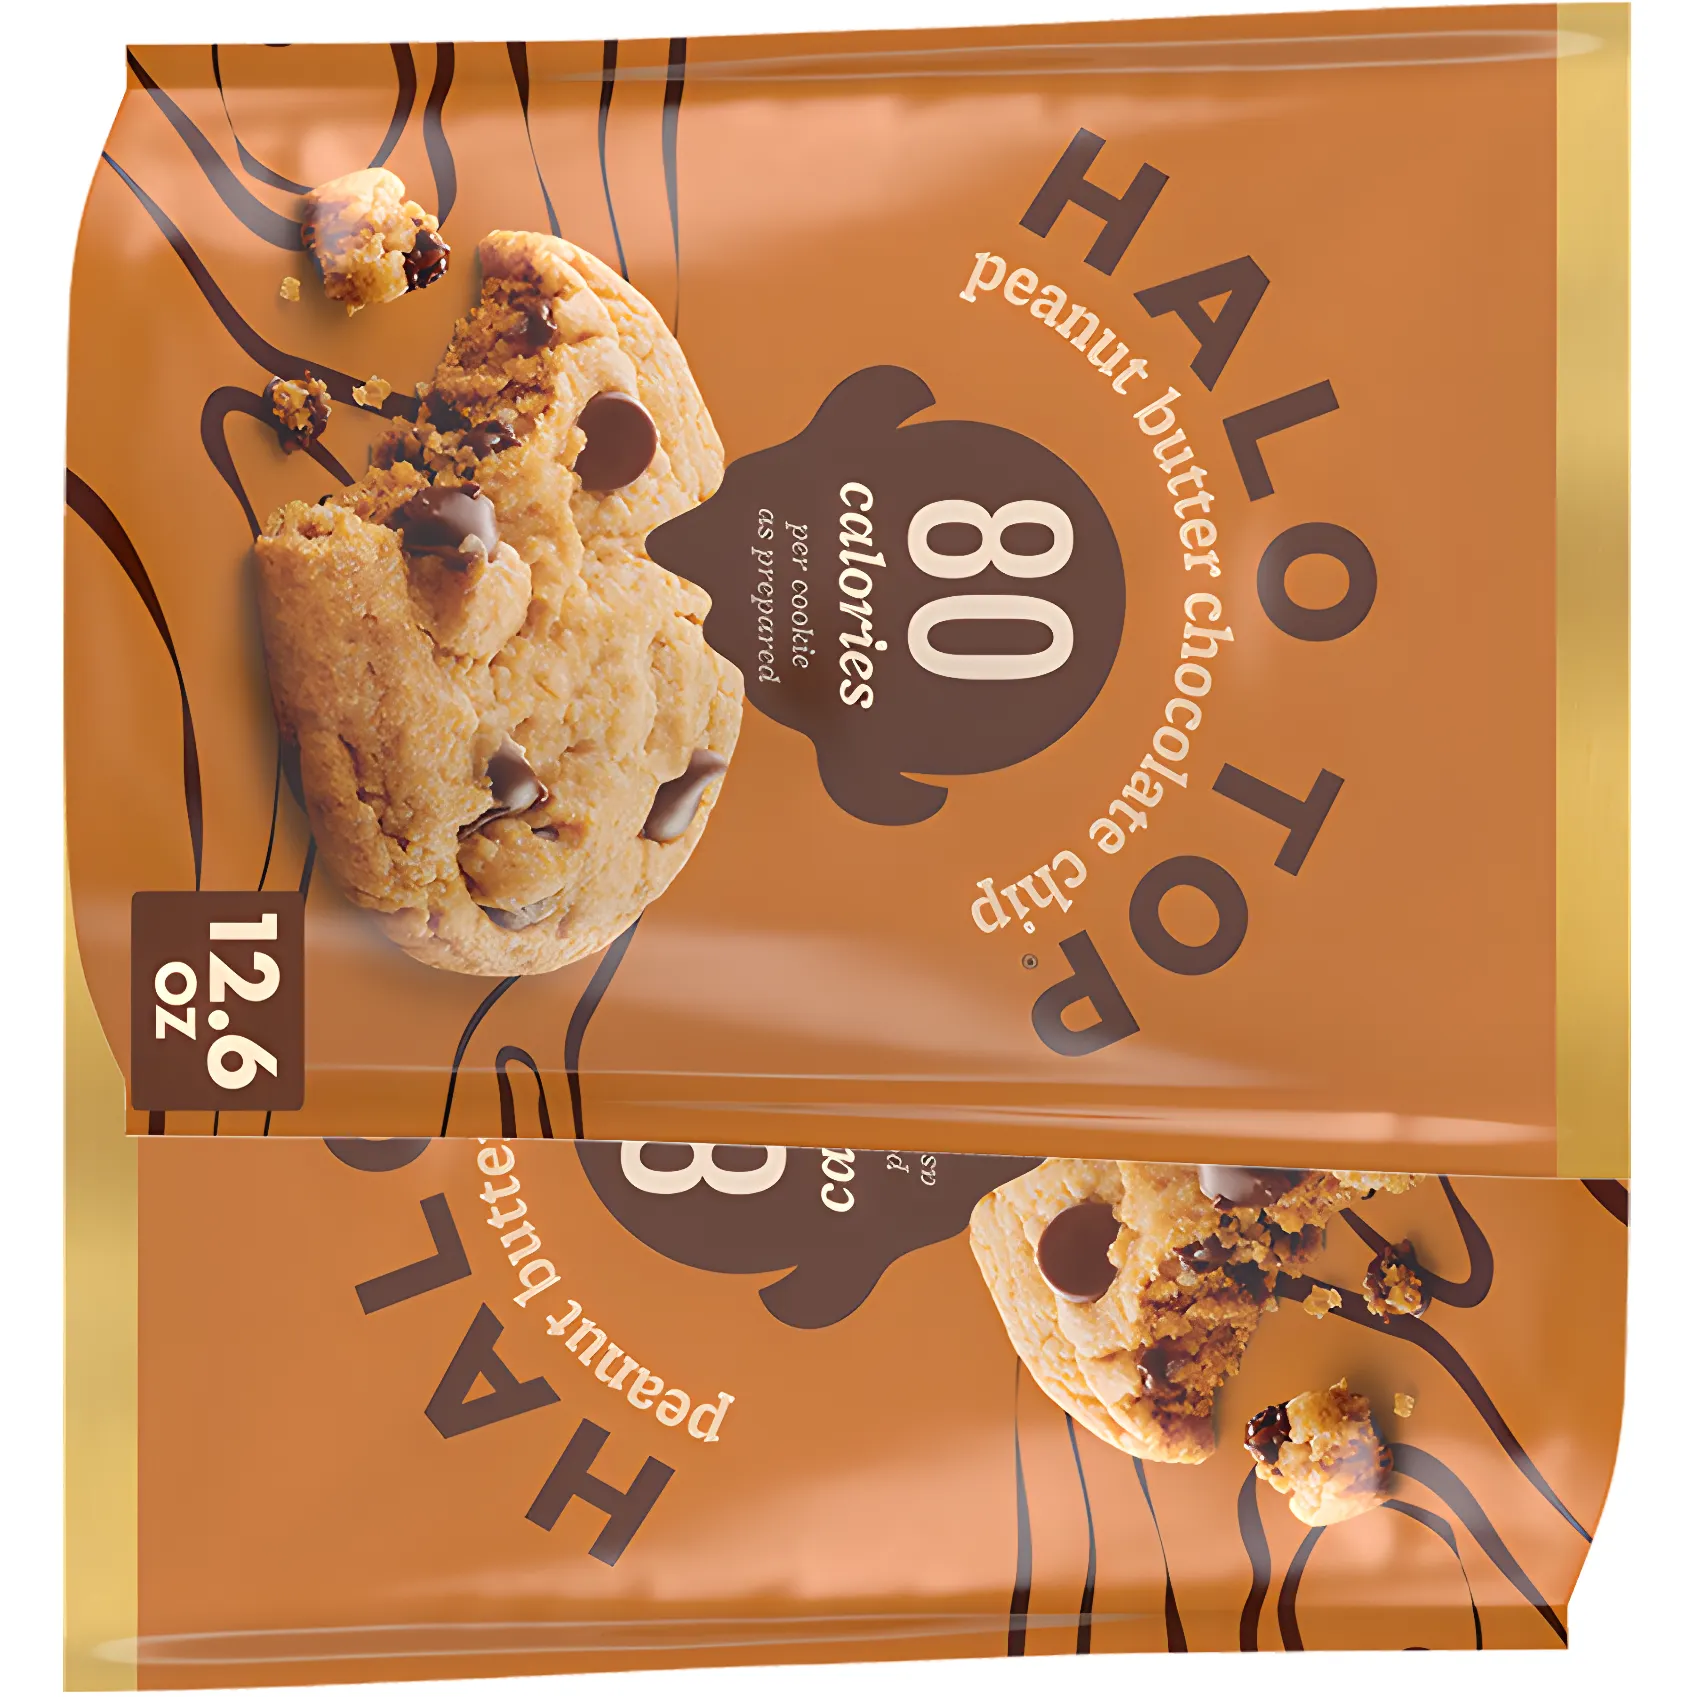 Free Halo Top Peanut Butter Chocolate Chip Light Cookie Mix After Rebate